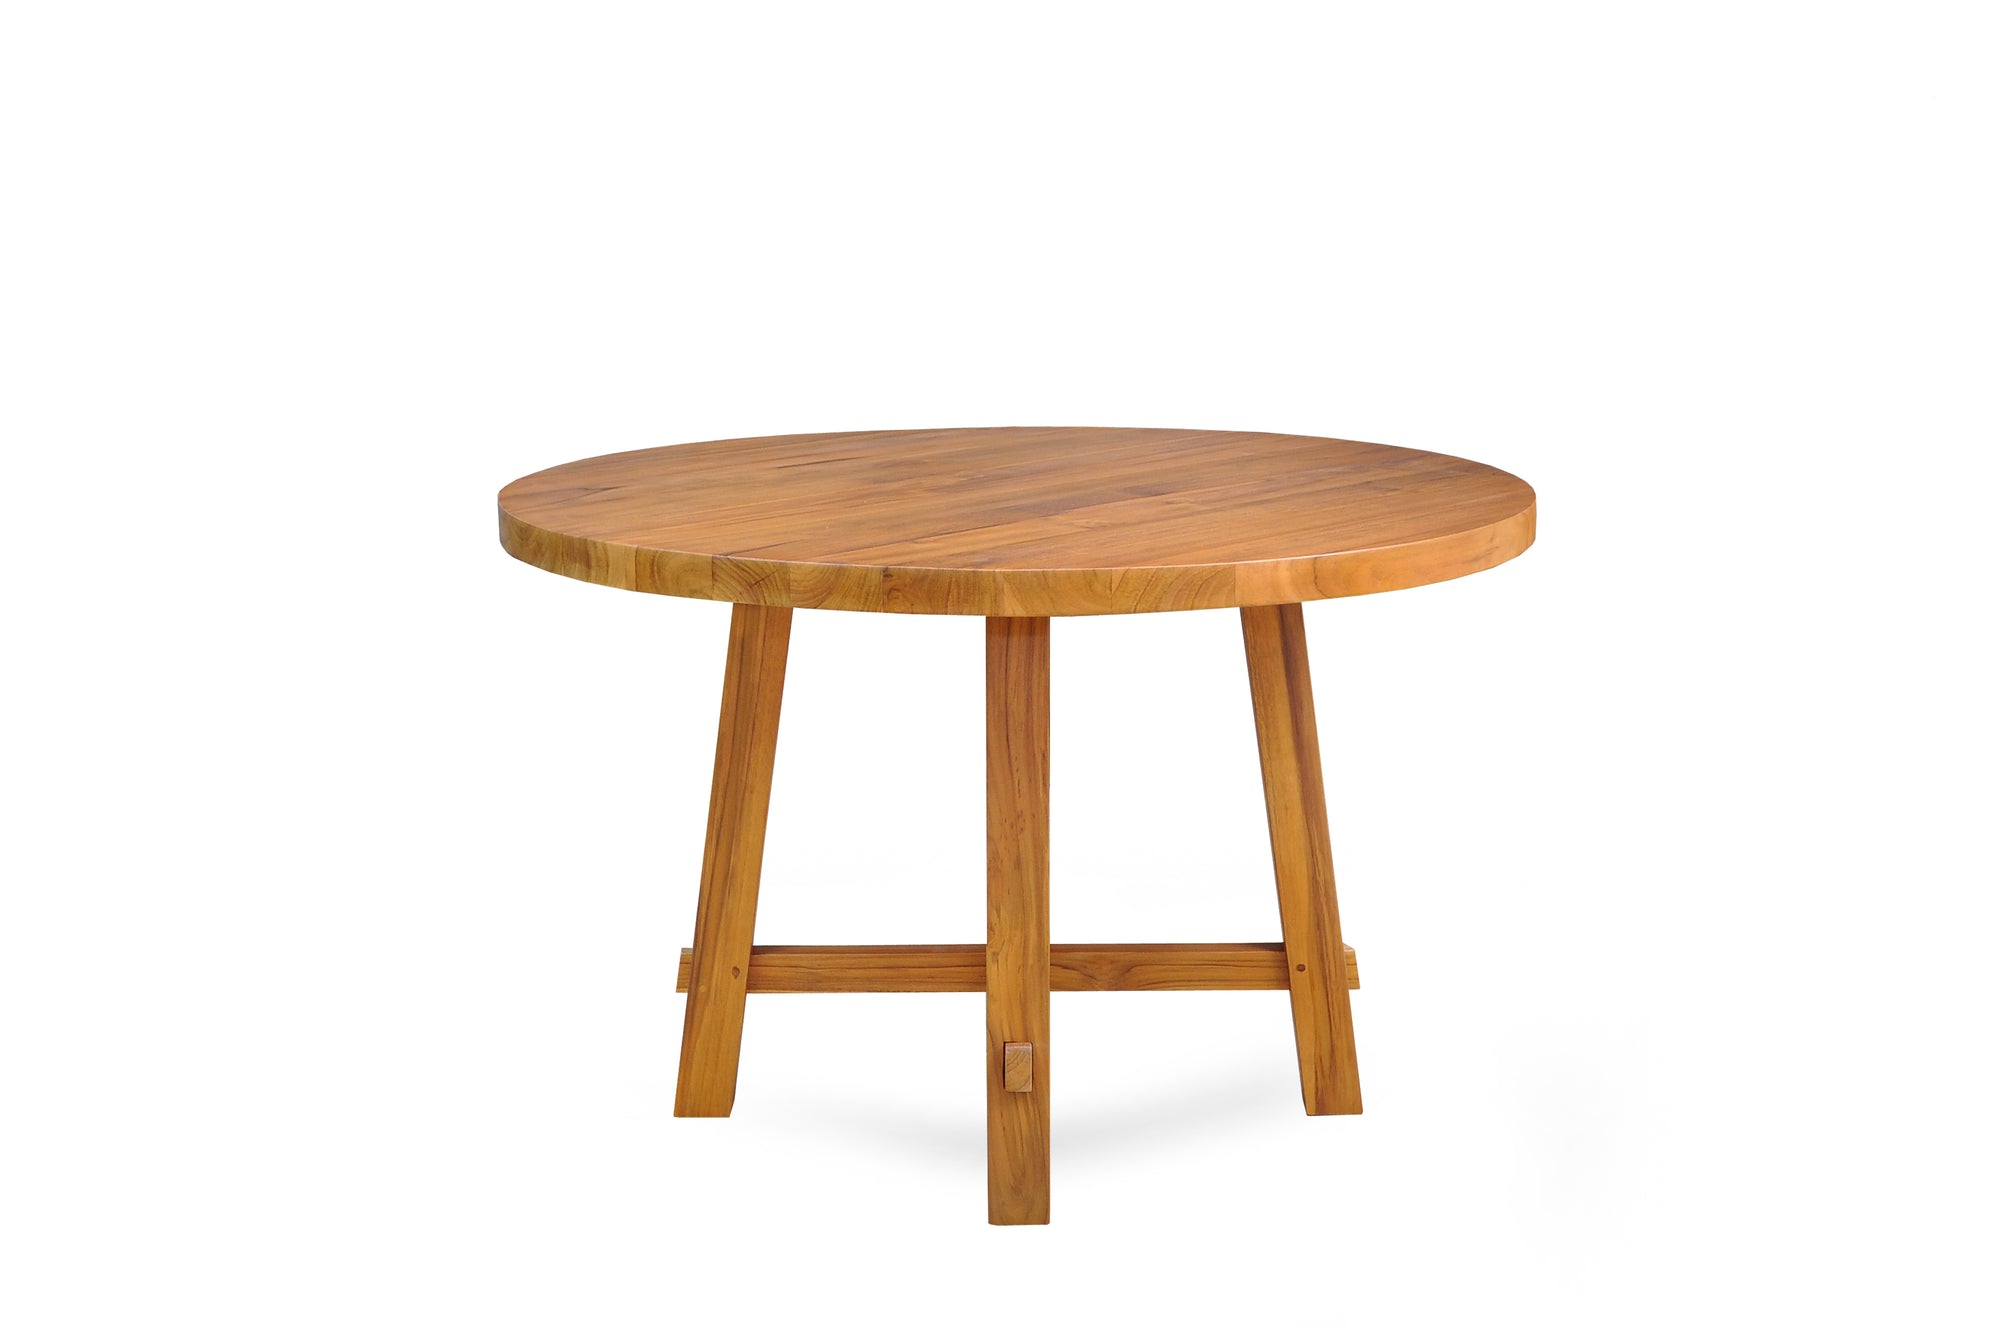 47" Round Teak Dining Table Candy Brown Finish